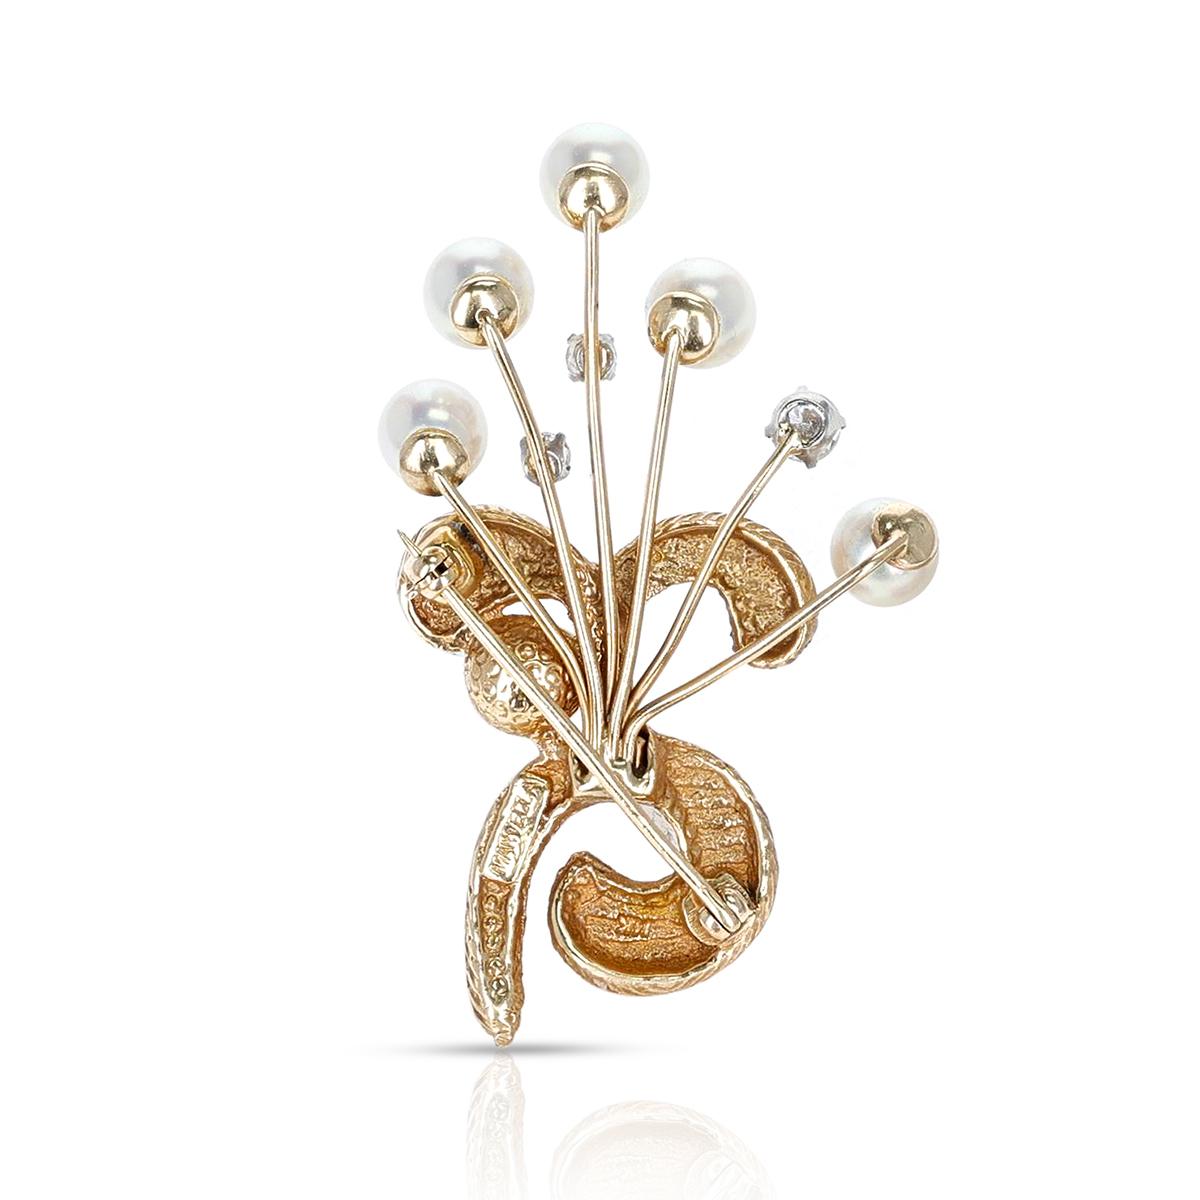 An artful and earthy cultured pearl and diamond brooch set in 14K Yellow Gold, with six round cultured pearls measuring 6.5-7MM accented with three round diamonds totaling 0.45 carats. Stamped 